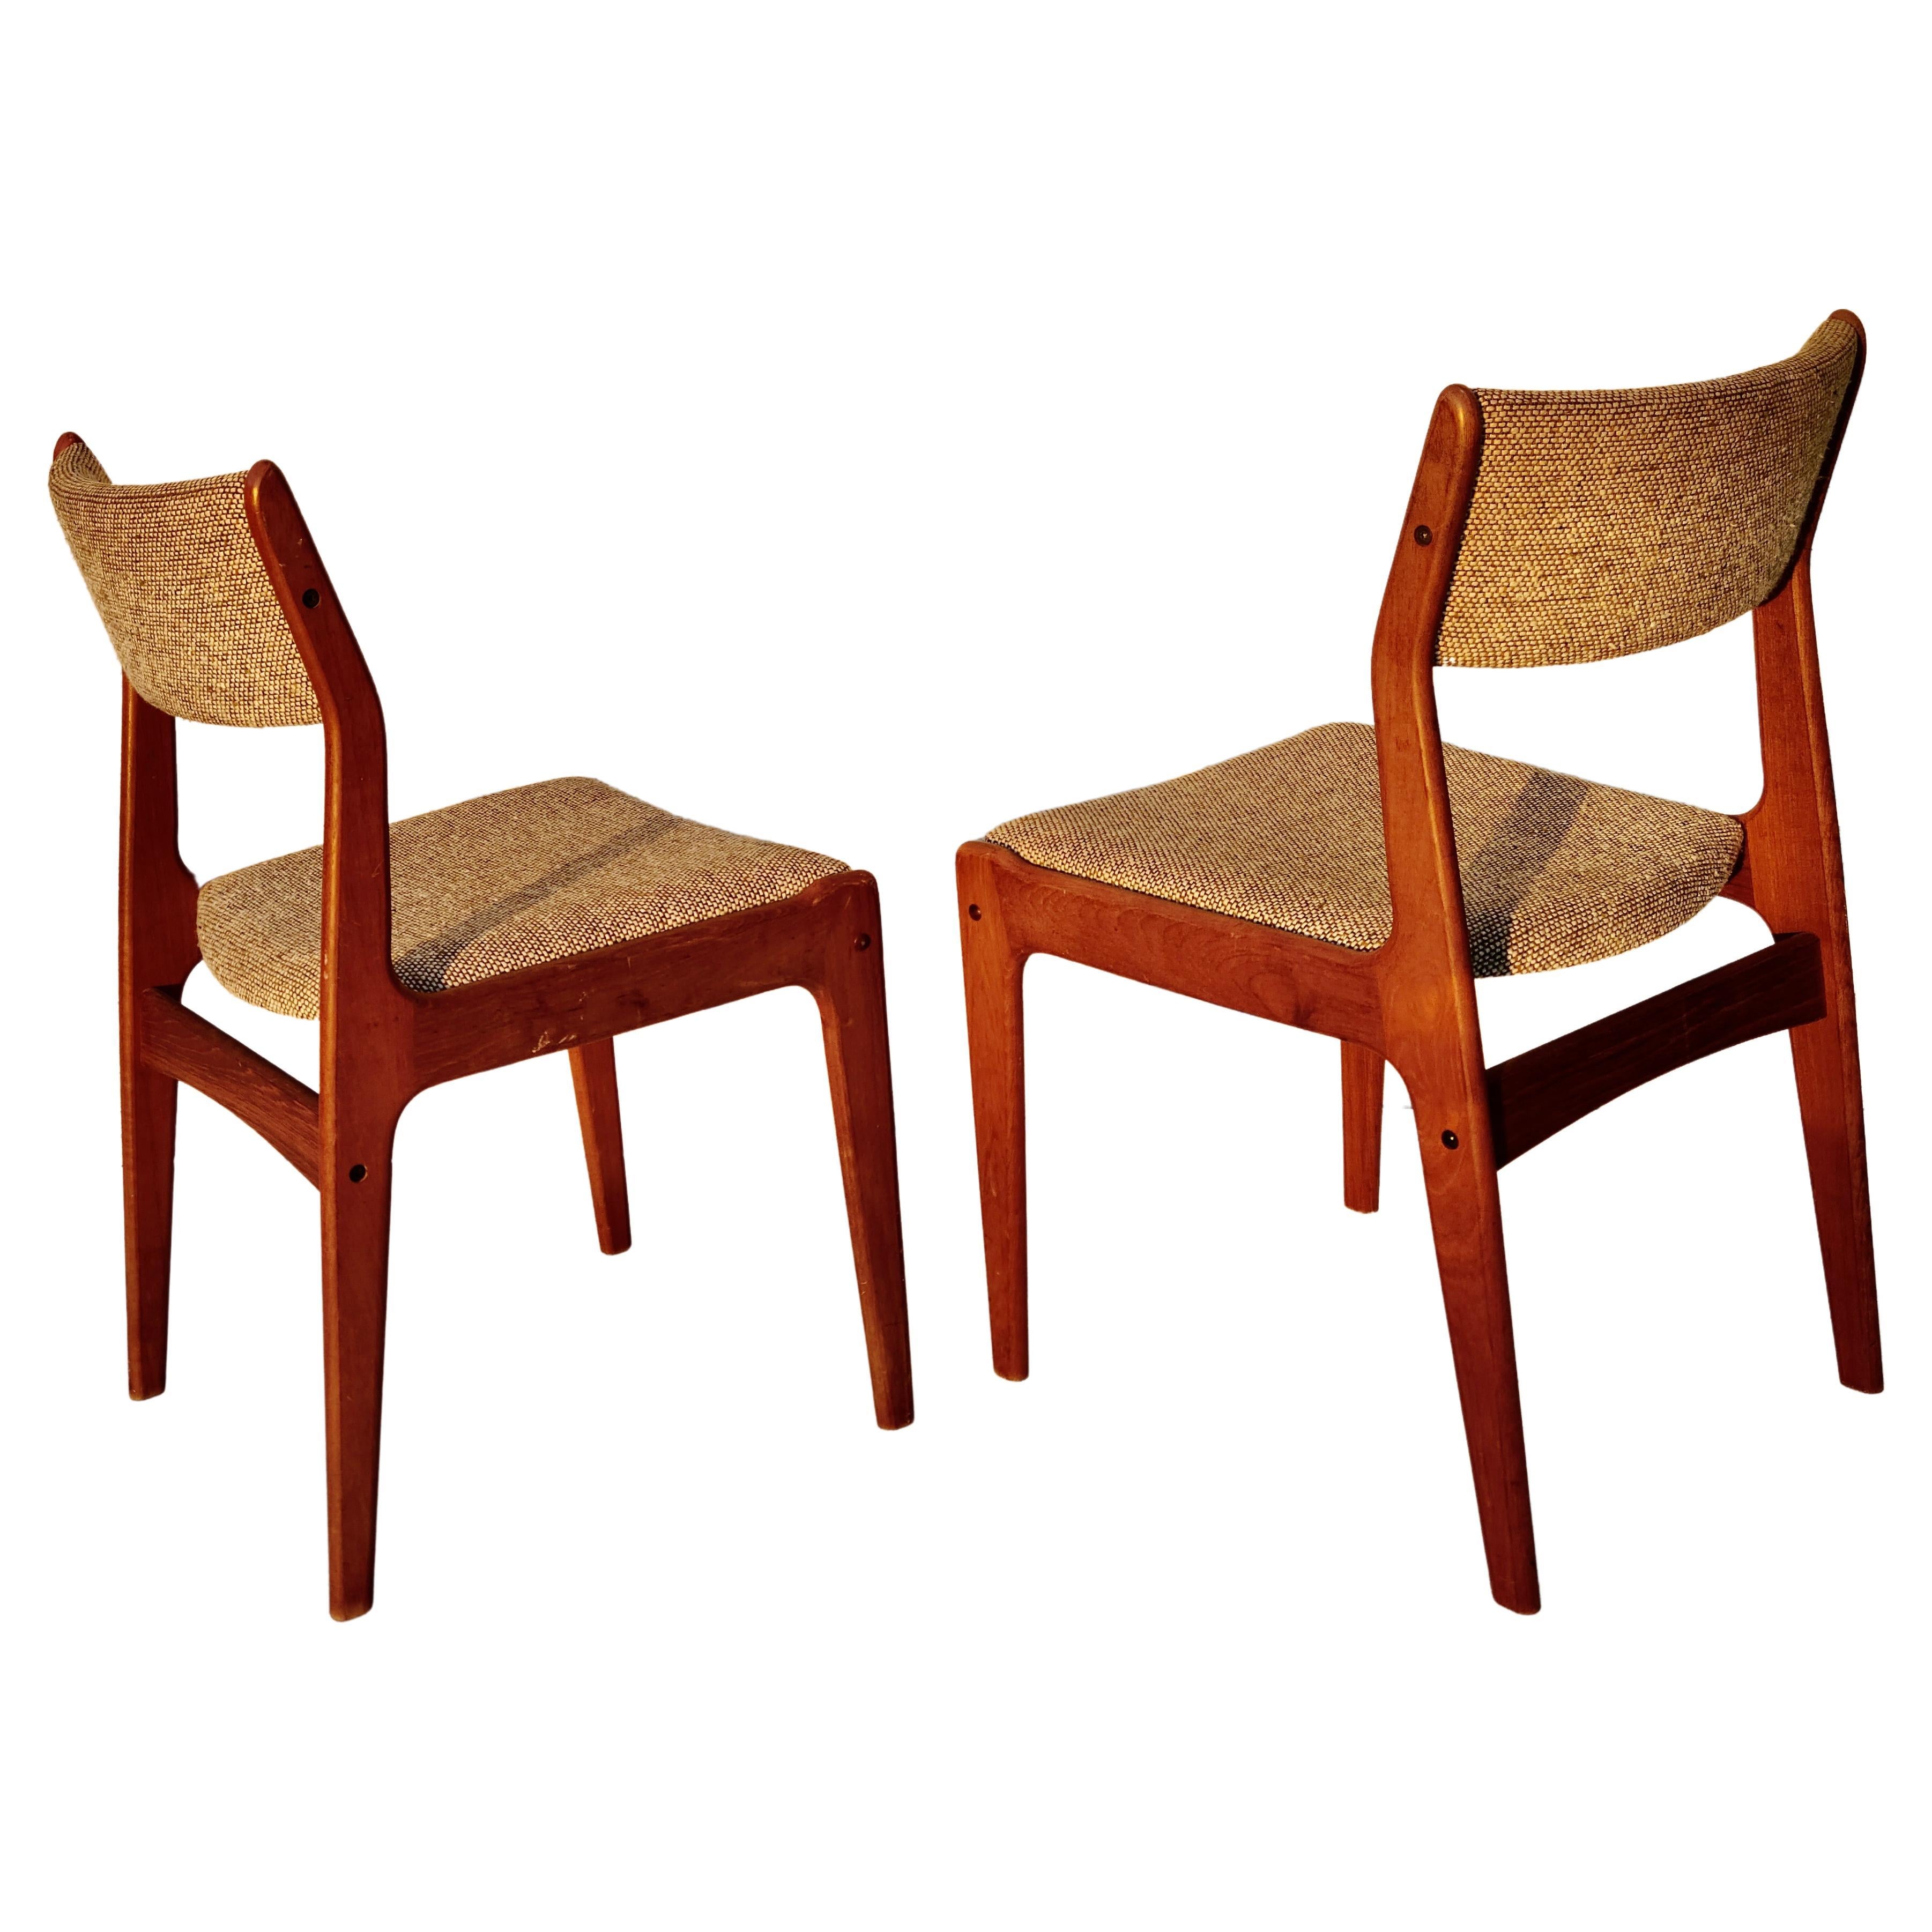 Please feel free to reach out for accurate shipping to your location.

Set of 6 Sculpted Solid Teak Dining Chairs.

Please check out our other items for Danish Dining Table Ansager Mobler Ox Art '73  to match.